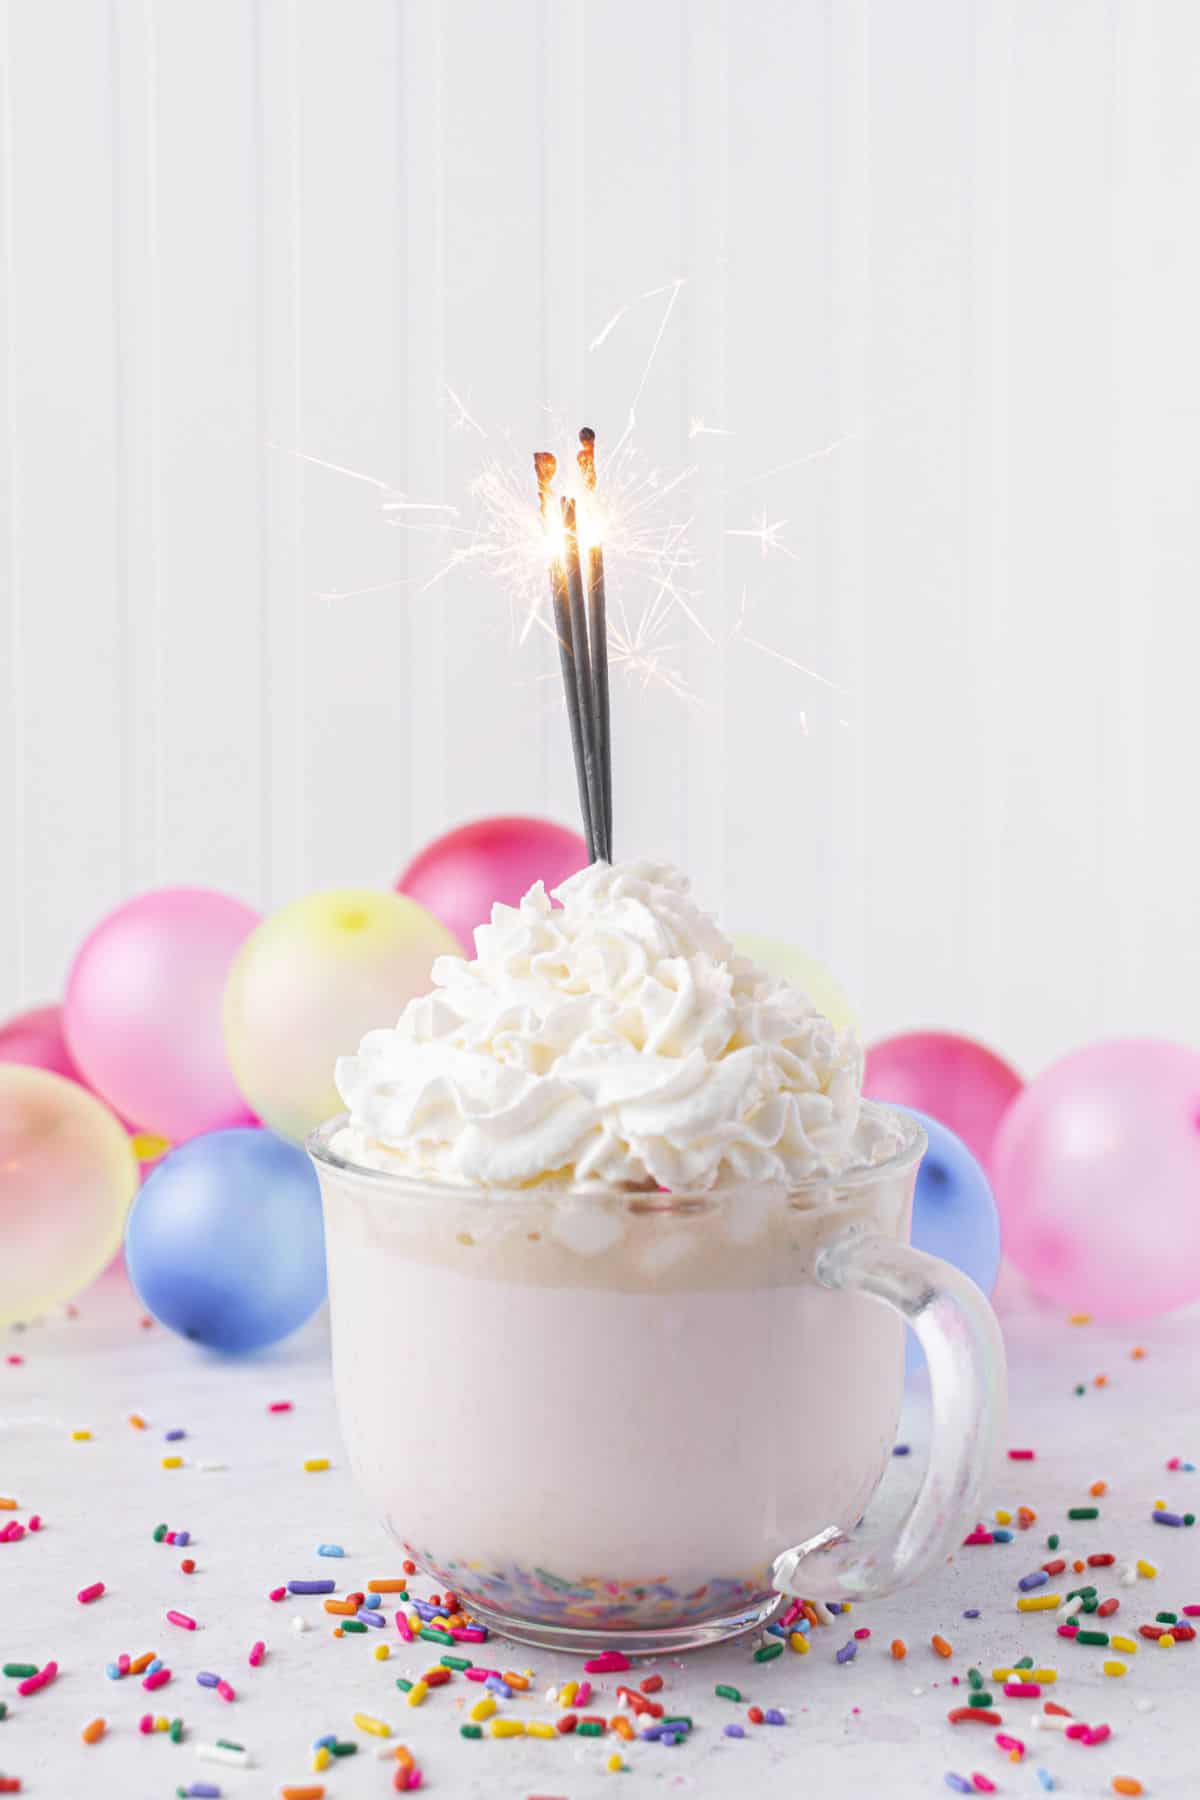 Mug of hot cocoa with whipped cream and sprinkles.